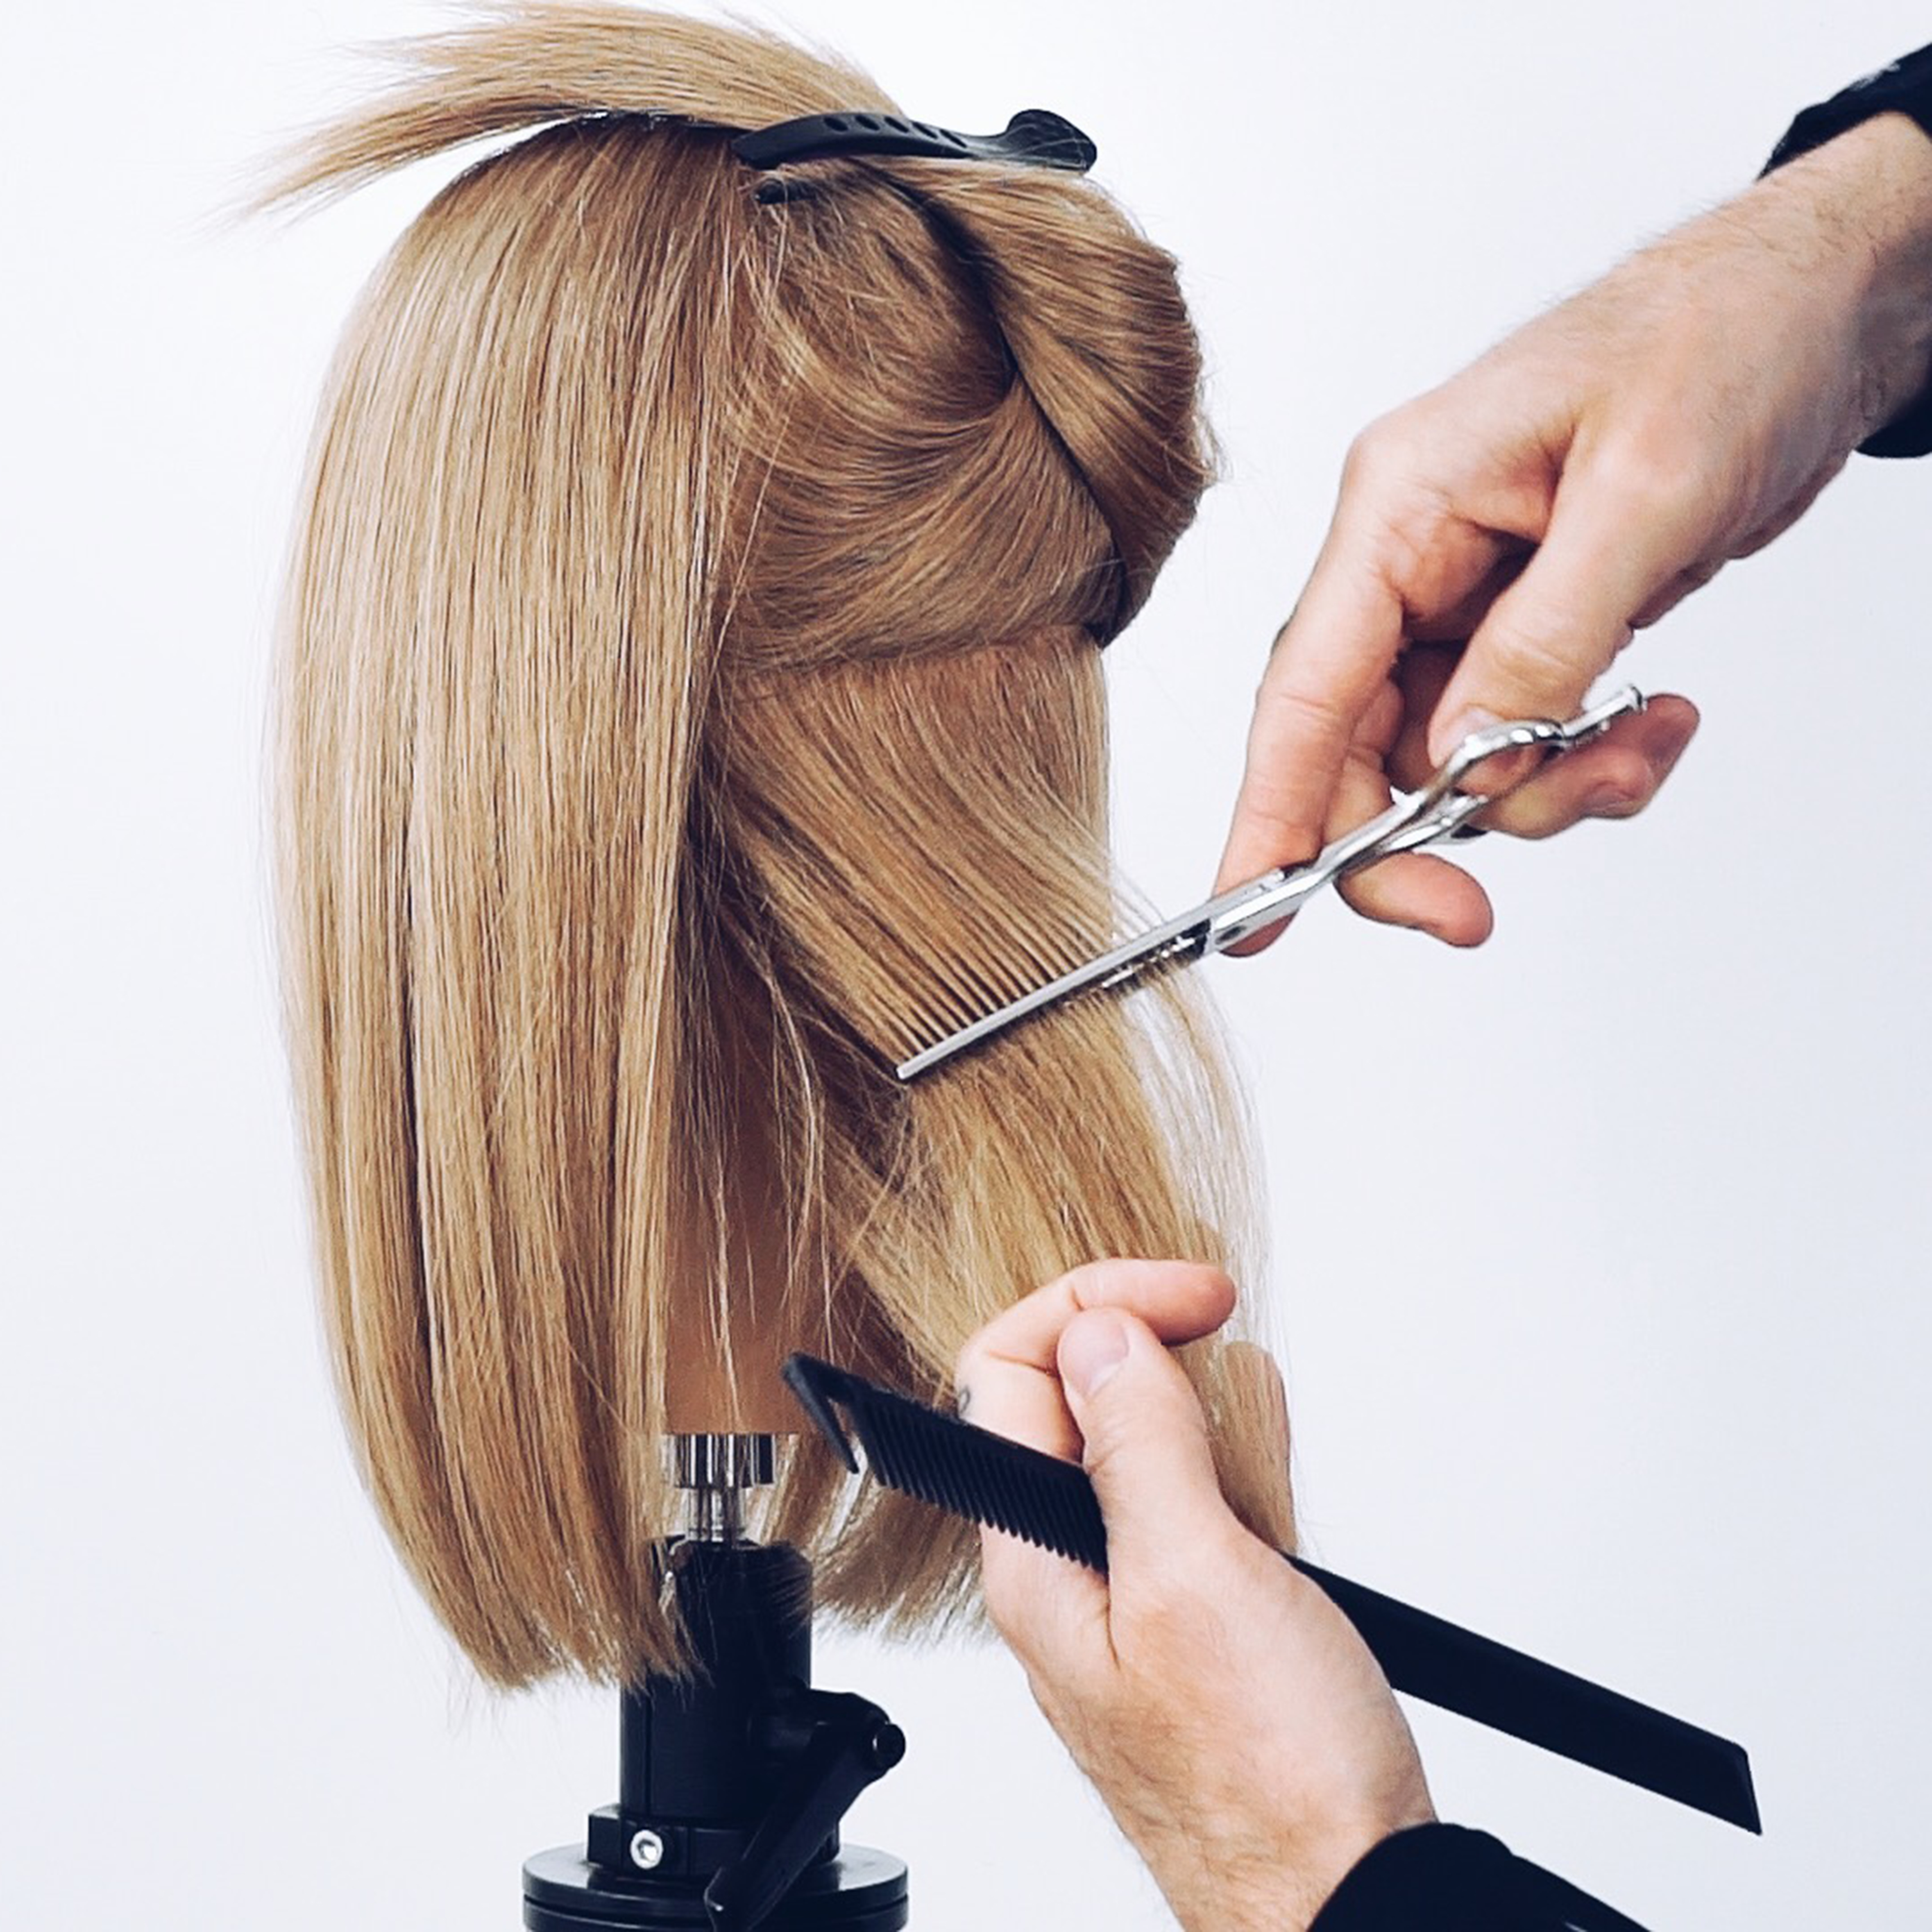 How to Texture Hair at Home 